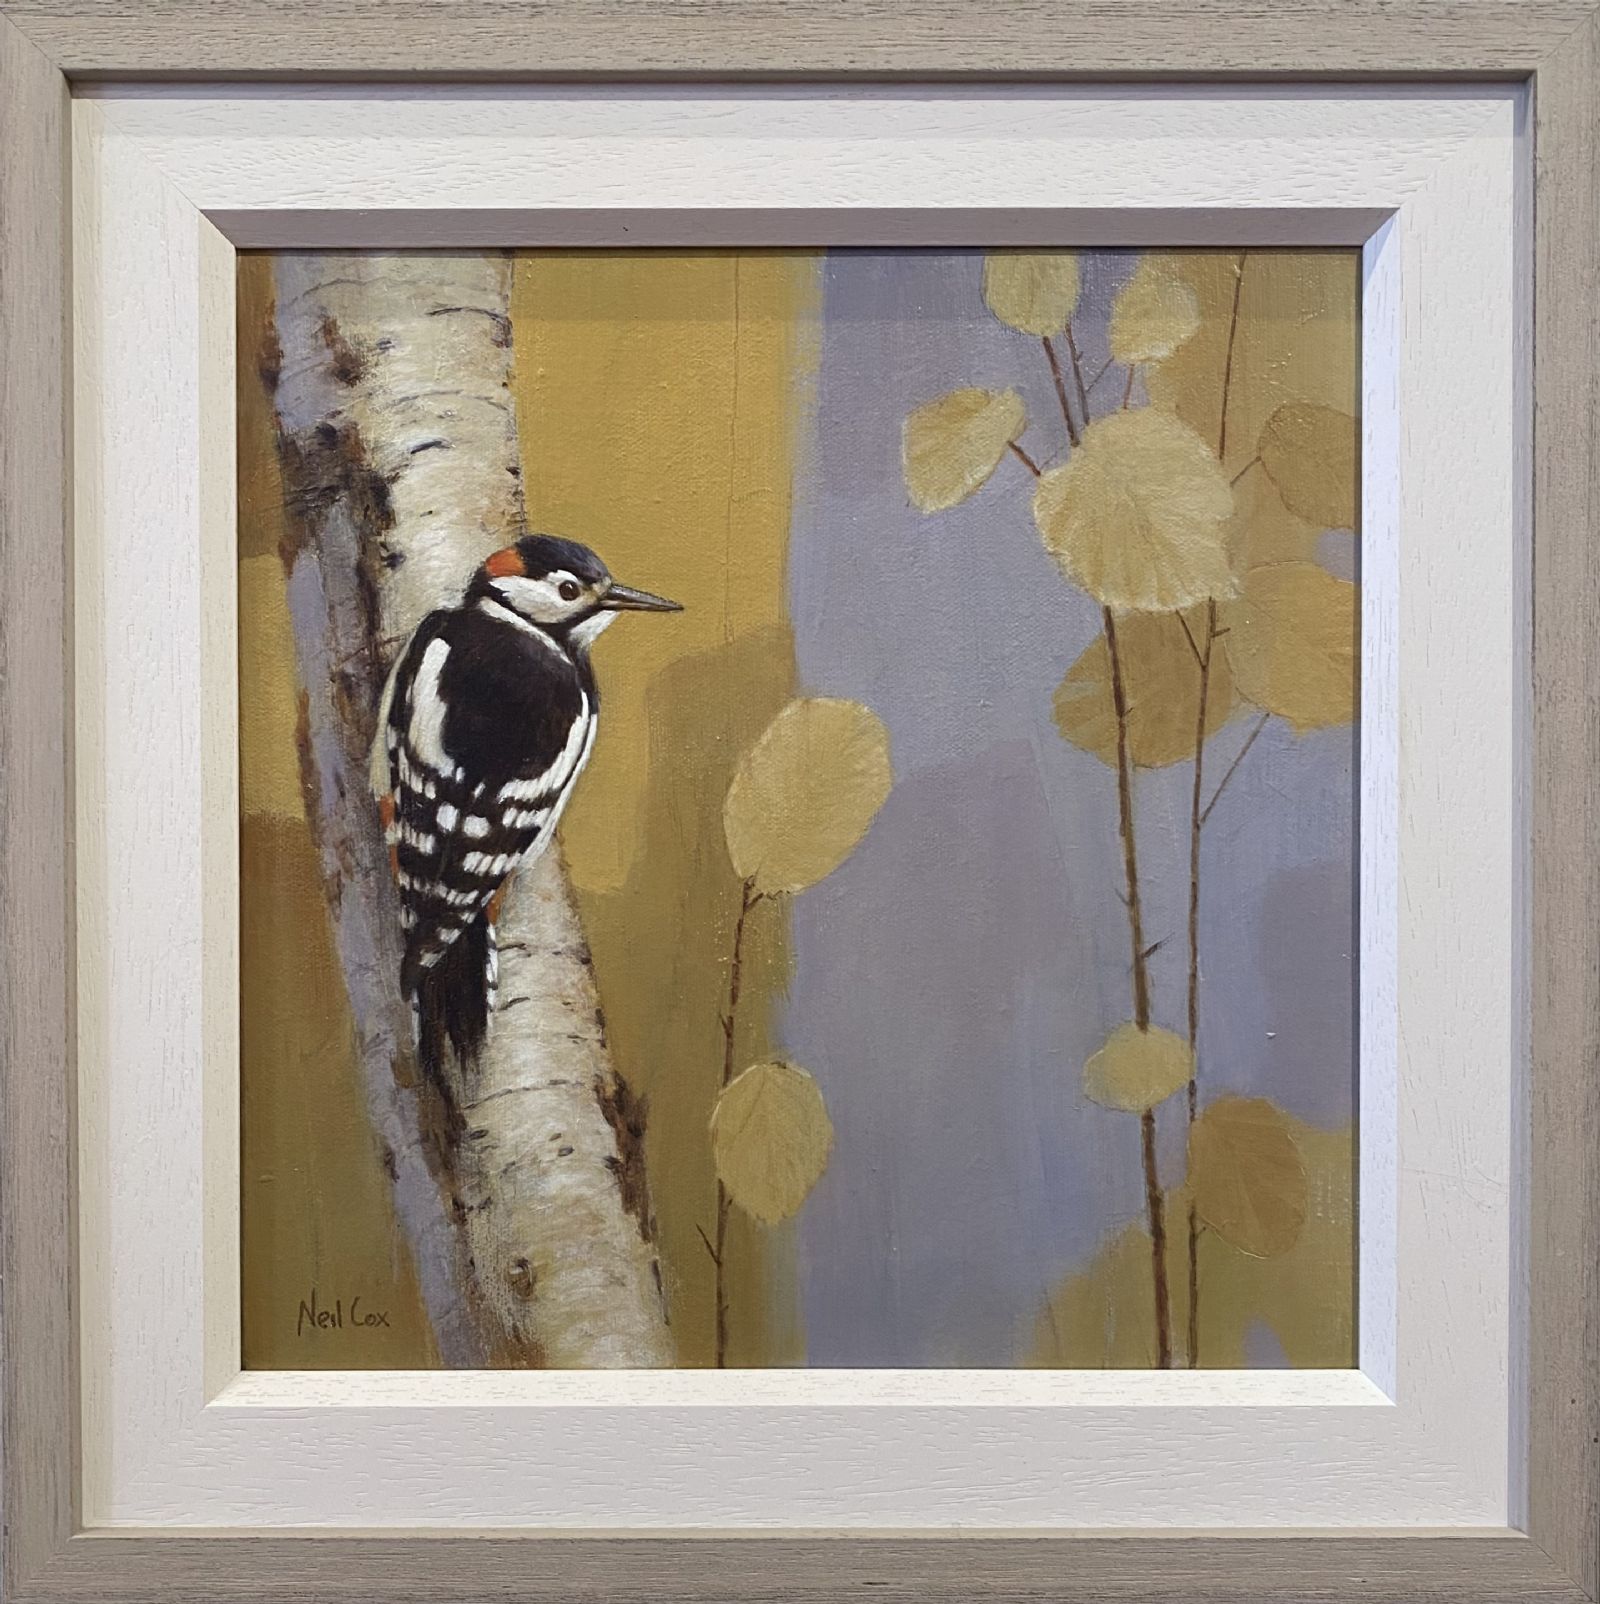 Shades of Autumn, Woodpecker by Neil Cox